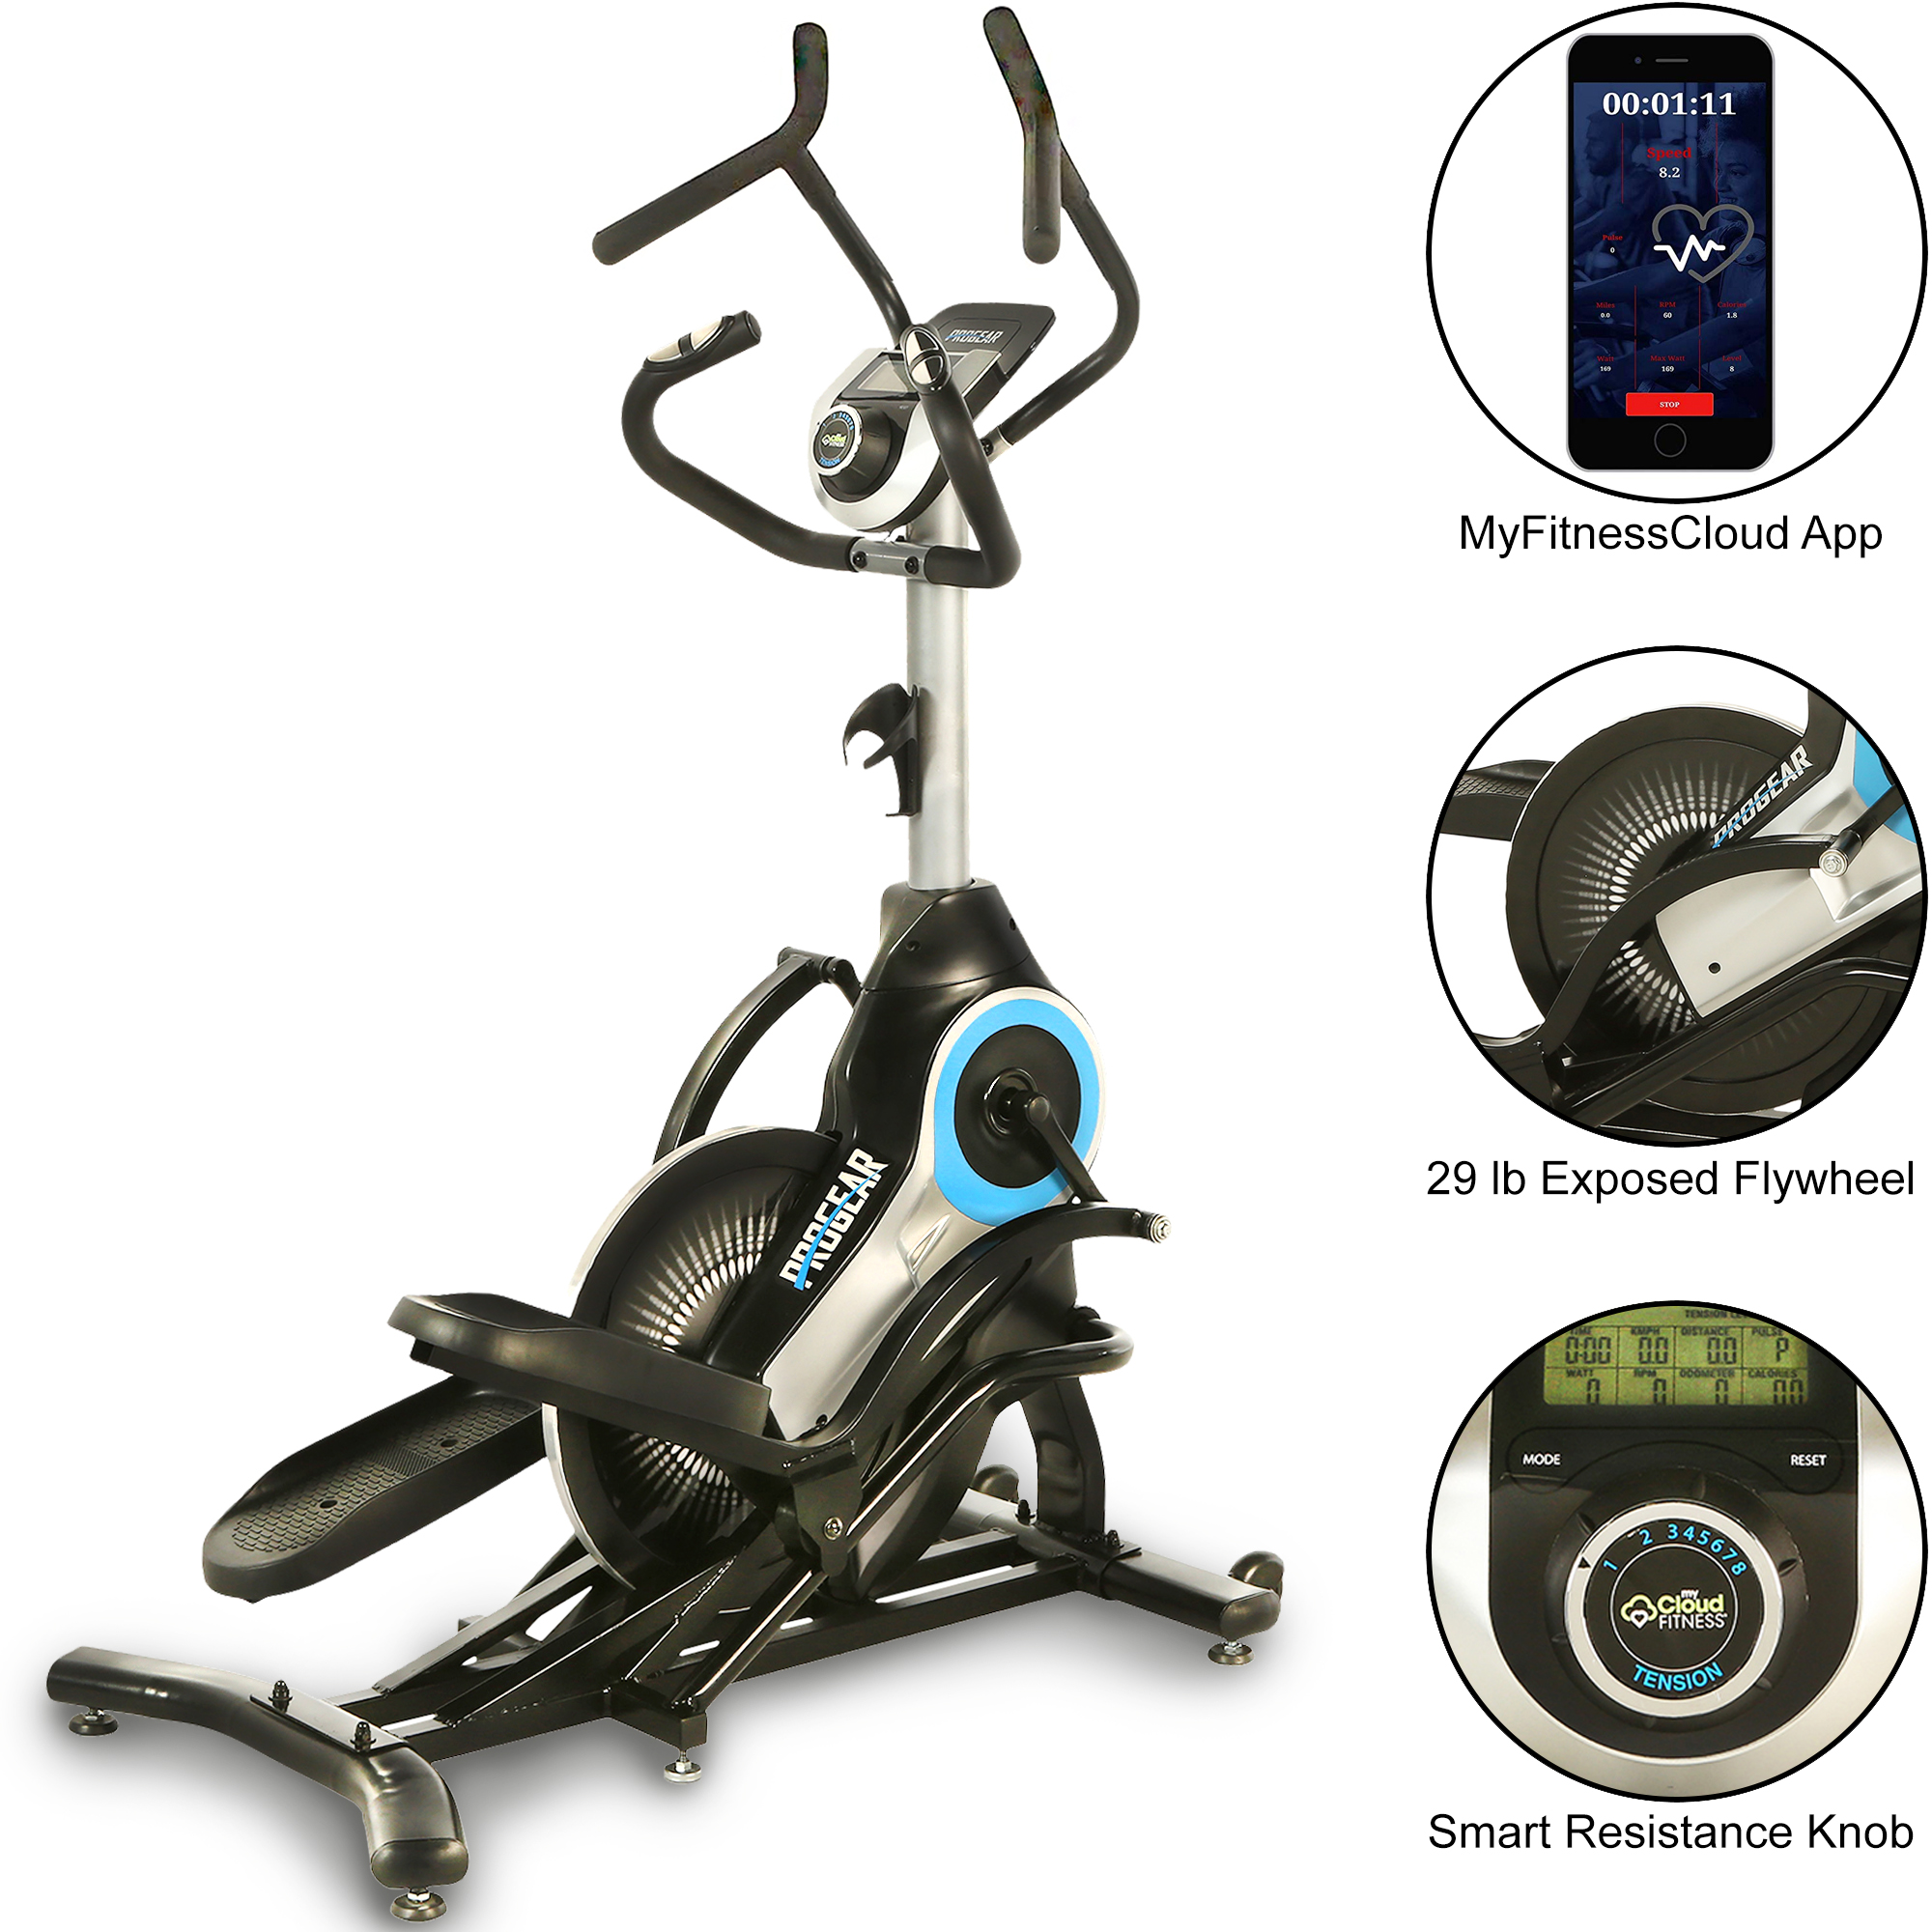 PROGEAR 9900 HIIT Bluetooth Smart Cloud Fitness Crossover Stepper/ Elliptical Trainer with Goal Setting and Free App - image 3 of 19